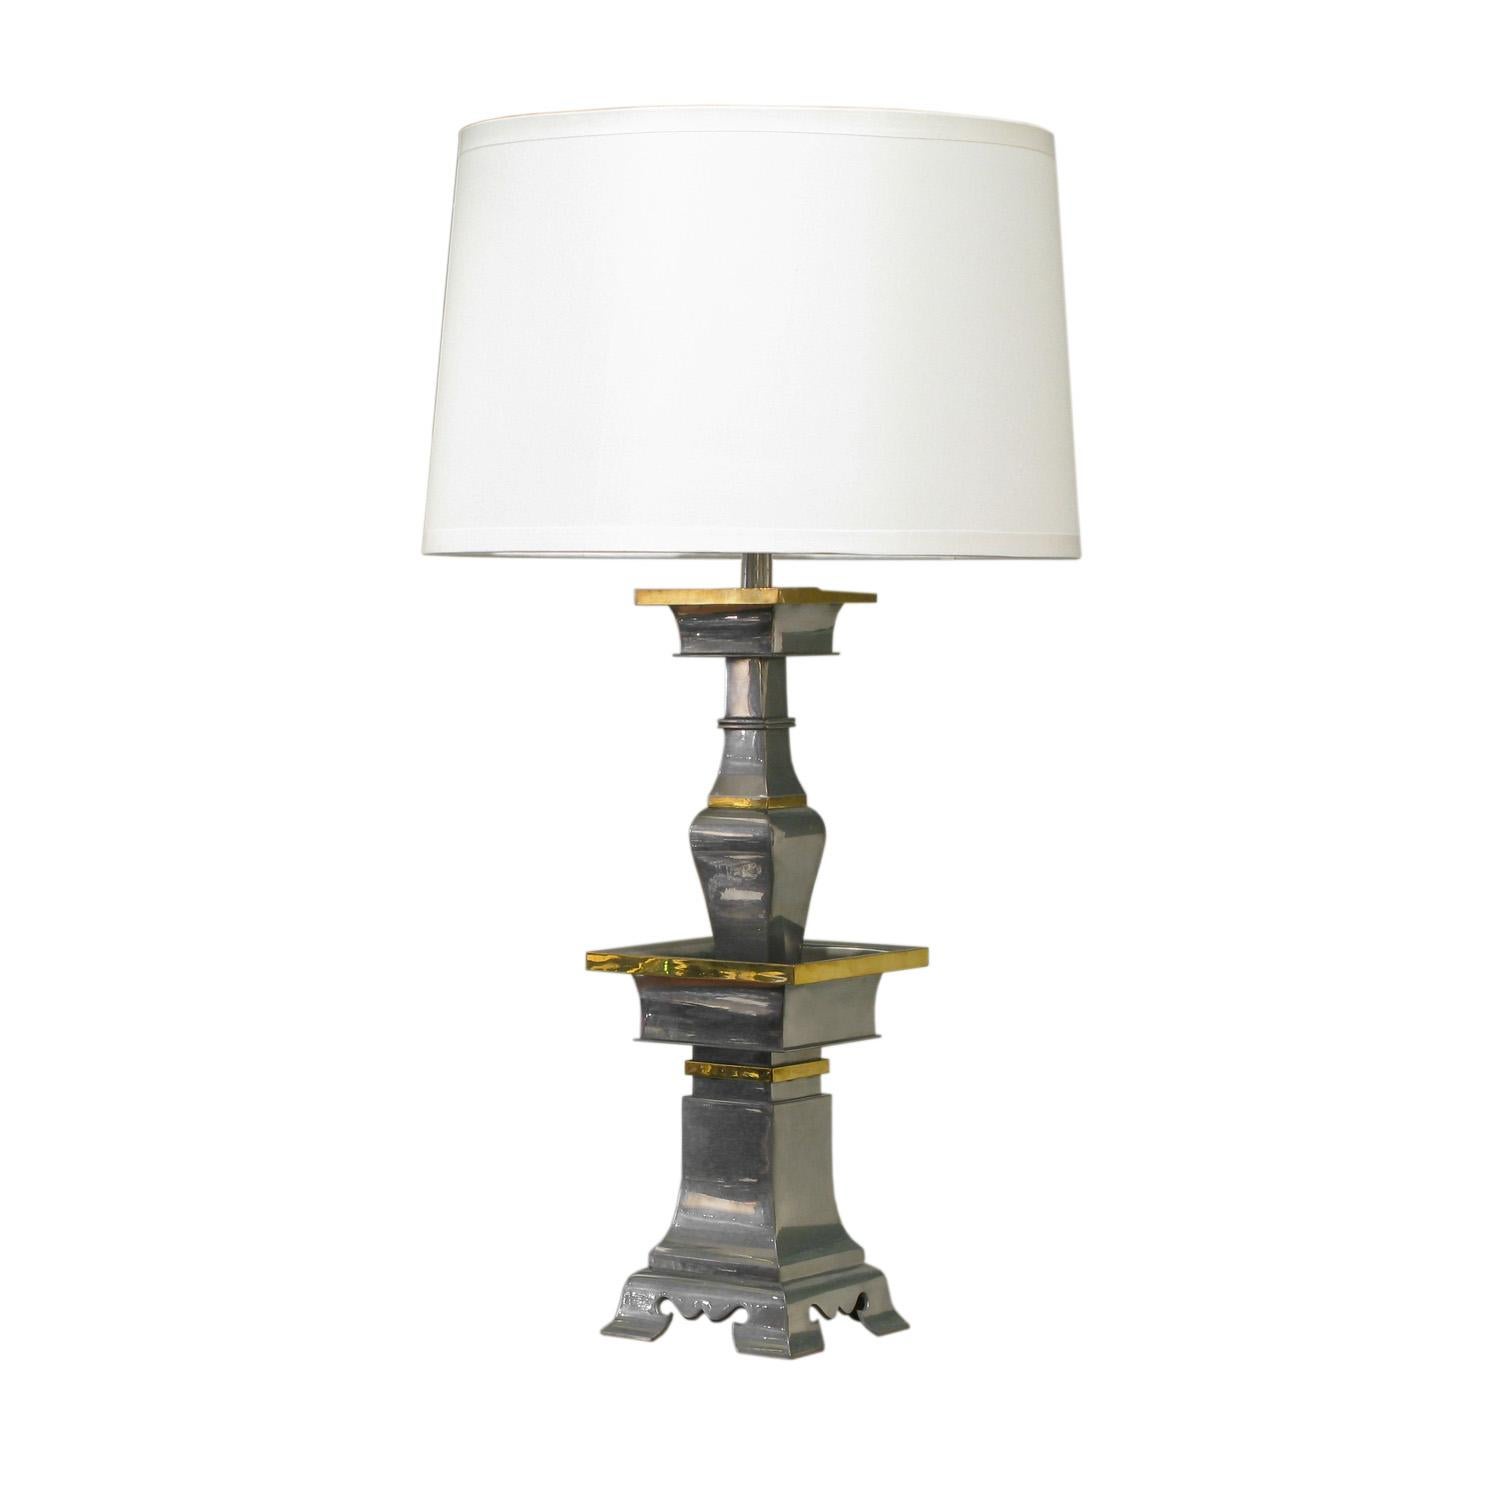 Pair of sculptural table lamps in pewter with brass accents by Marbro Lighting, American, 1960s. These lamps are beautifully made. Height is adjustable.